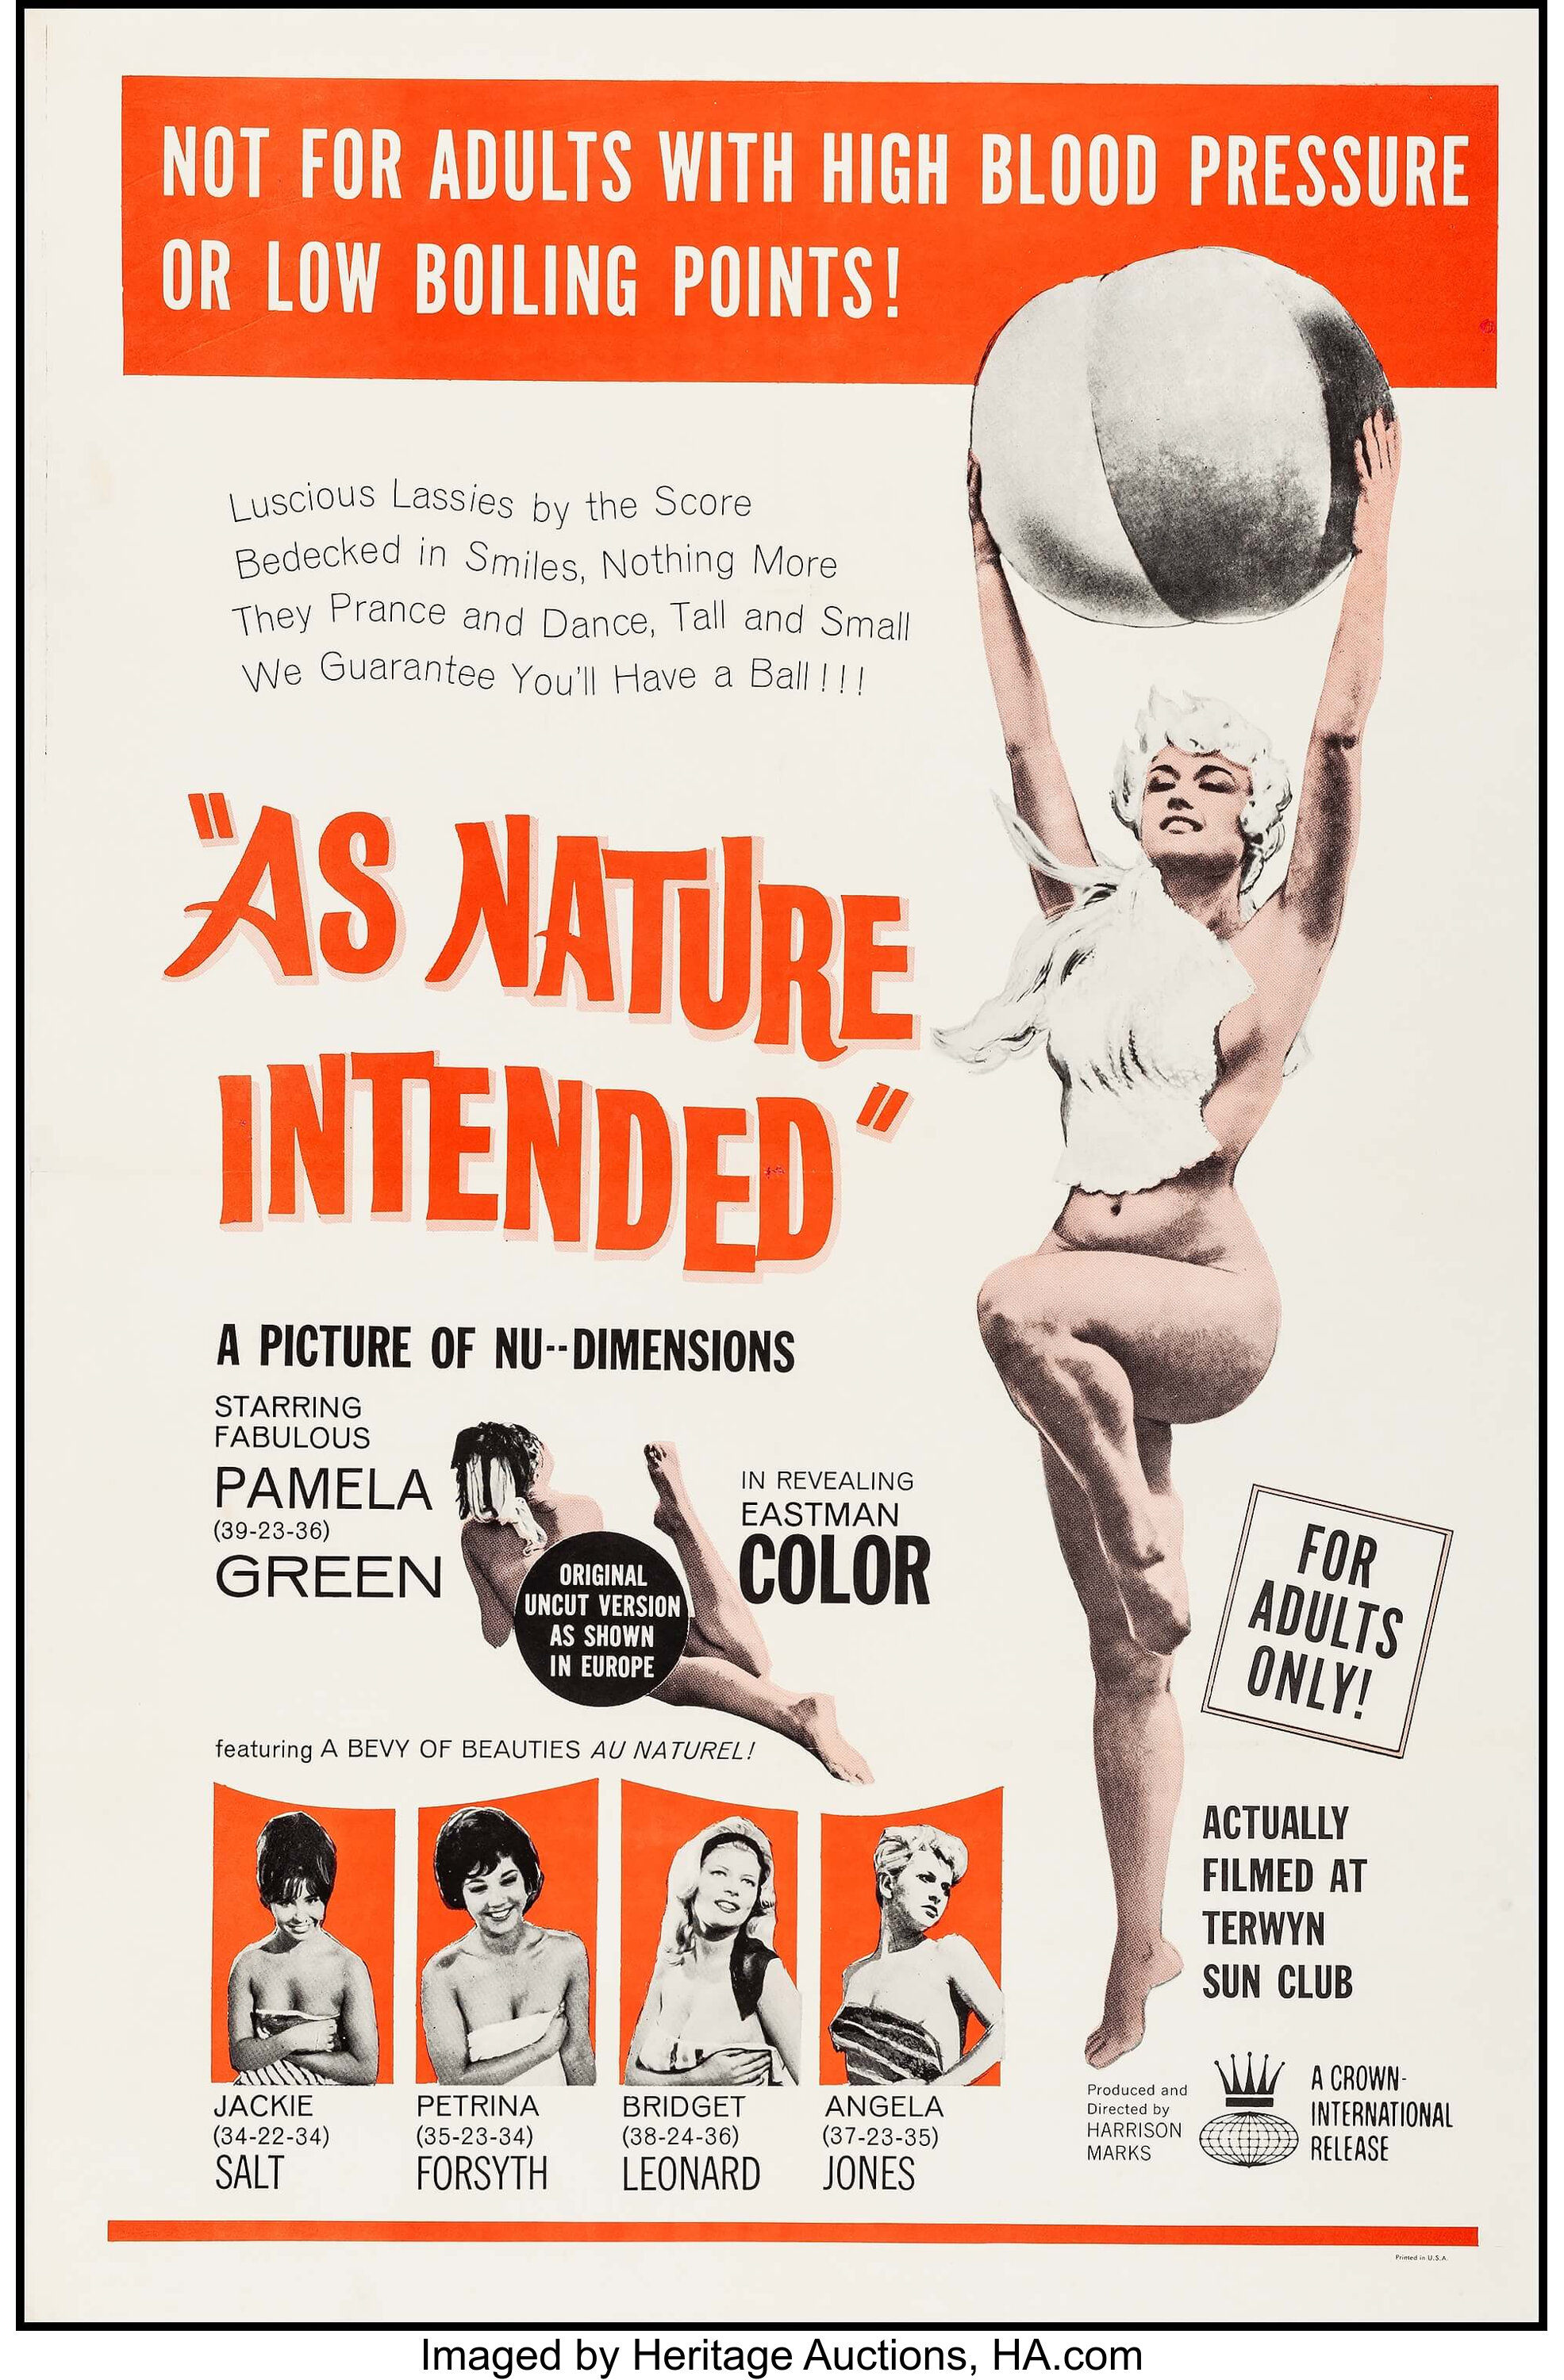 Nature Intended International, 1961). One Sheet X | Lot #53018 | Heritage Auctions